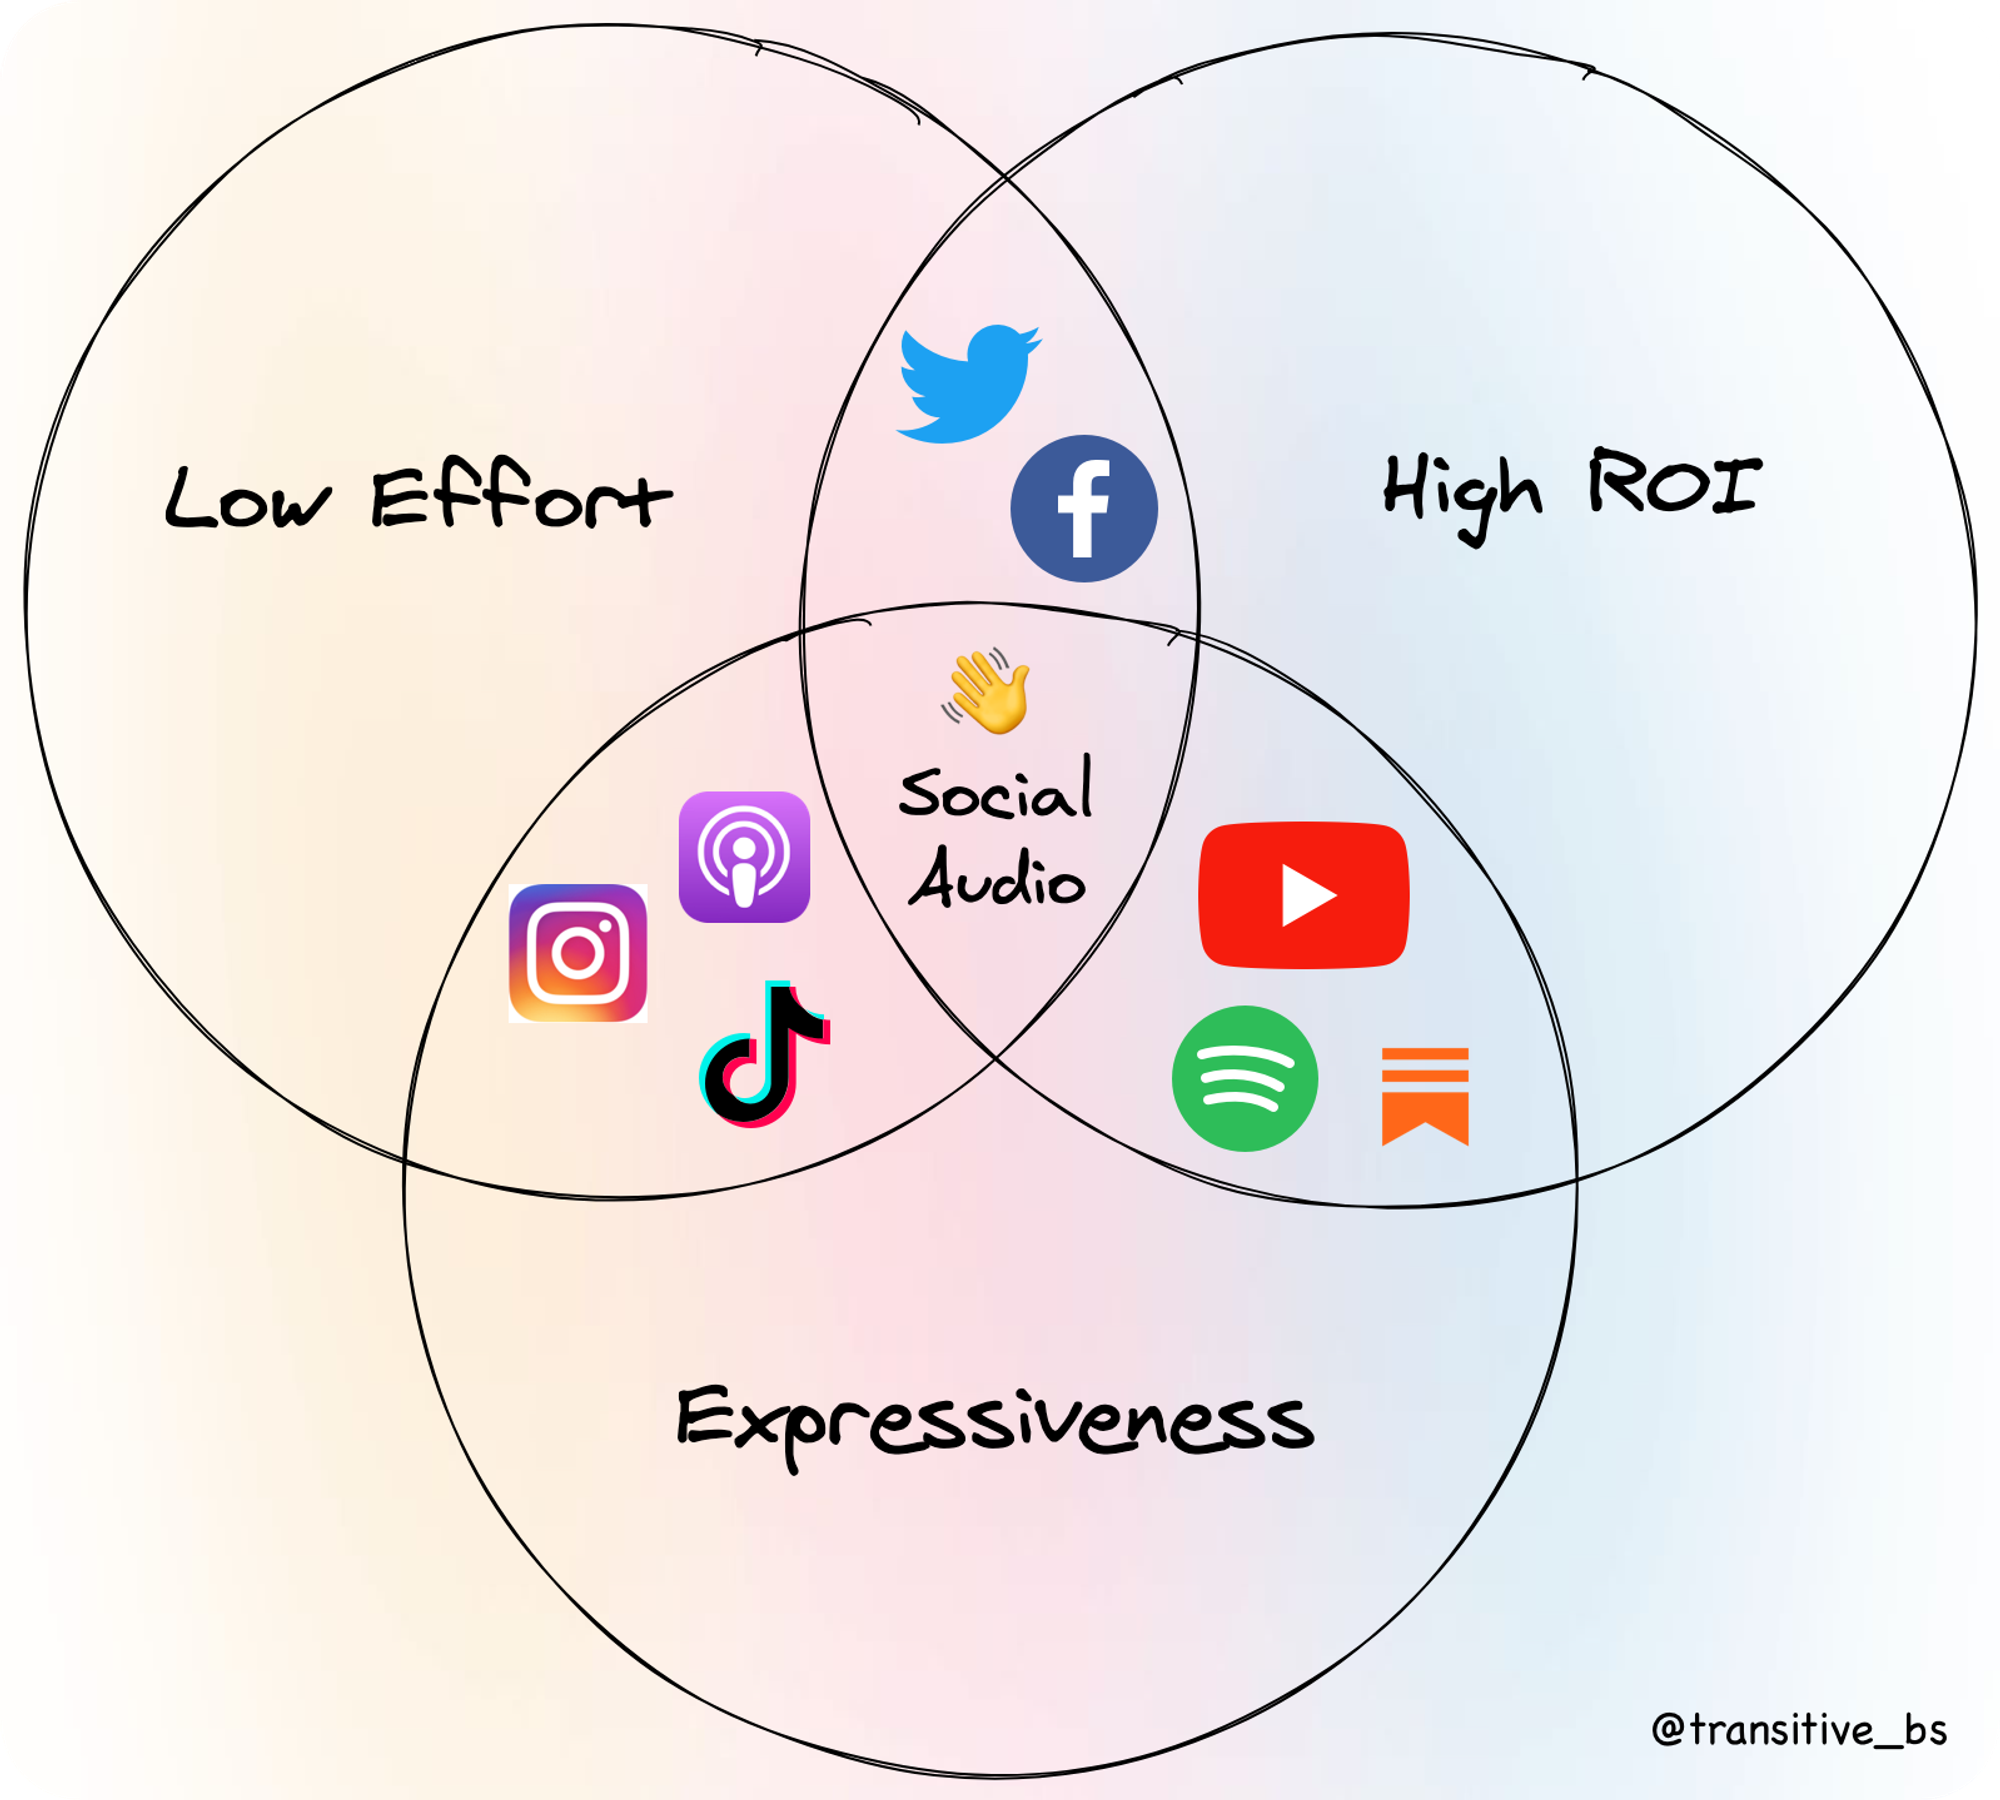 Let me know if you'd like me to go into more detail on this "social audio sweet spot" on Twitter, a platform where it's super low effort to create tweets with a relatively high prospect for engagement and reach at the cost of allowing for only a relatively low amount of expressiveness.